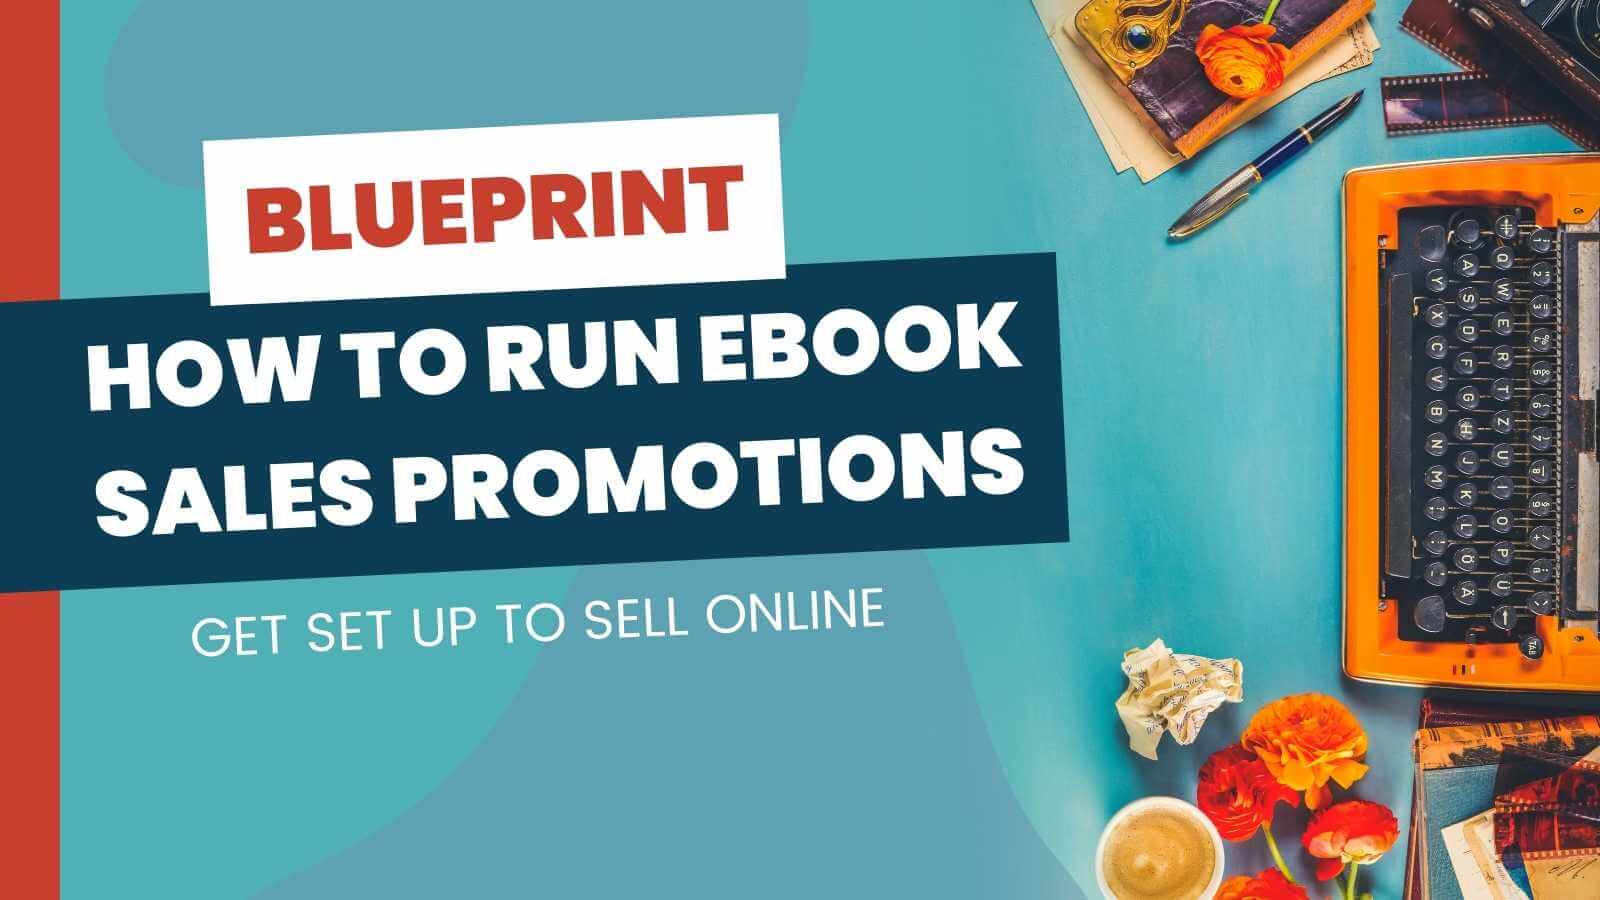 The Modern Solopreneur’s Blueprint to eBook Sales Promotions